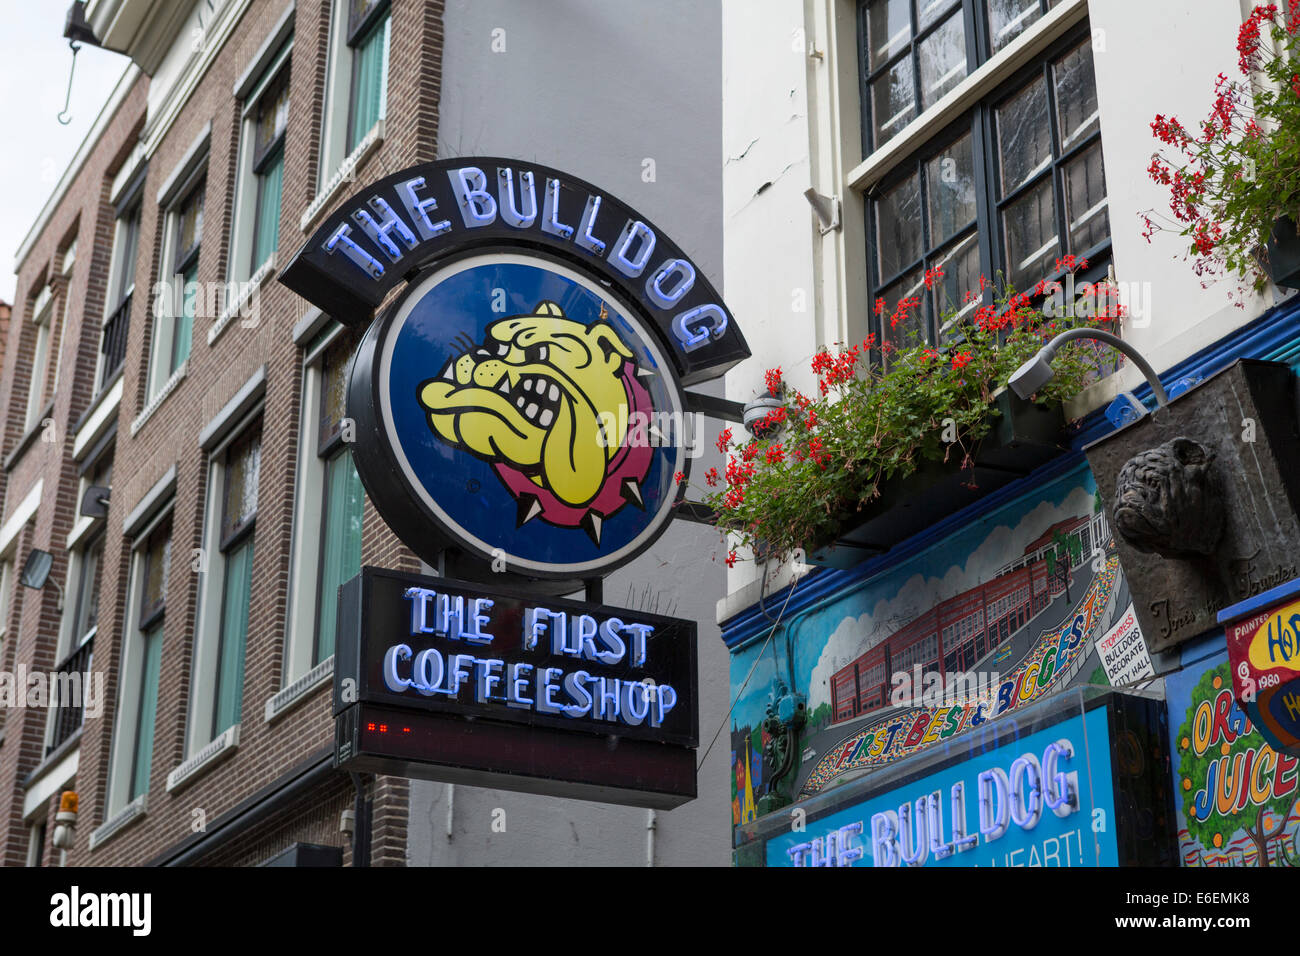 Entrance sign and logo of 'the Bulldog', the first coffeeshop (sale of soft drugs) of Amsterdam in the Netherlands. Stock Photo